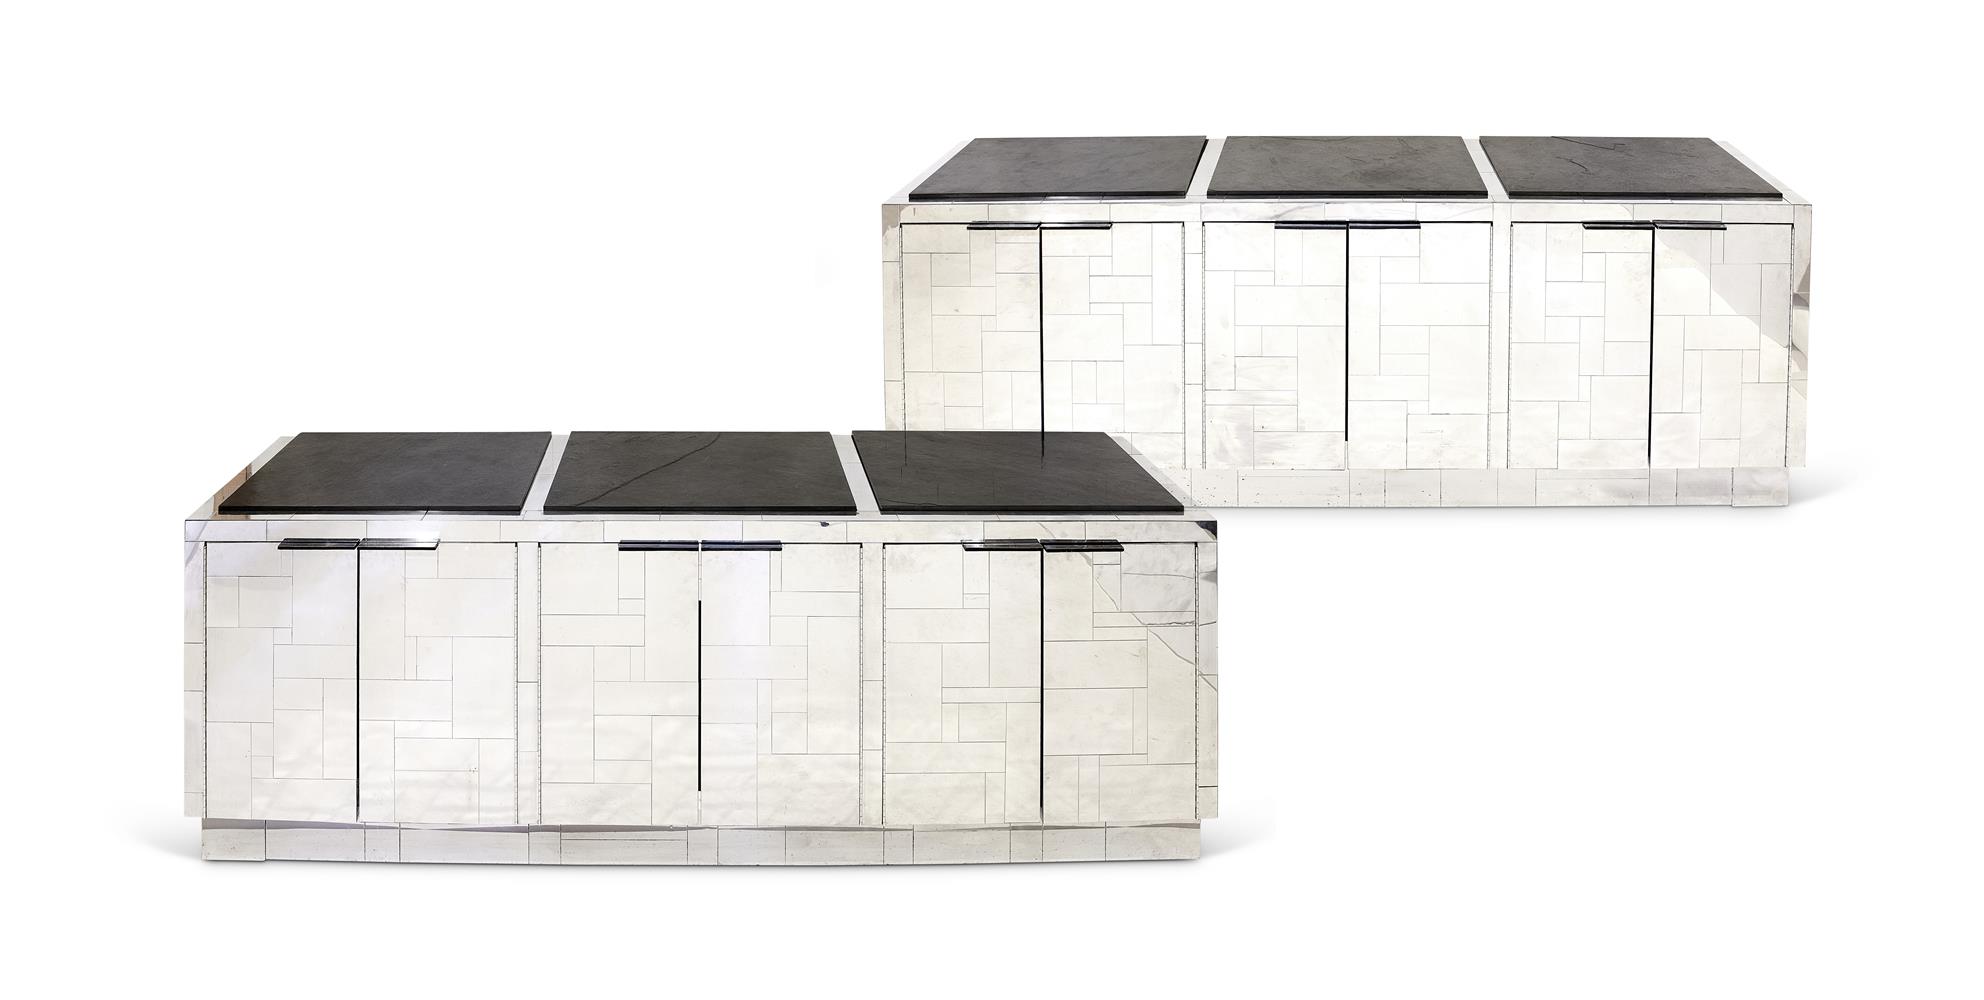 PAUL EVANS (1931-1987), A PAIR OF CHROMIUM POLISHED STEEL SIDE CABINETS, CIRCA 1970